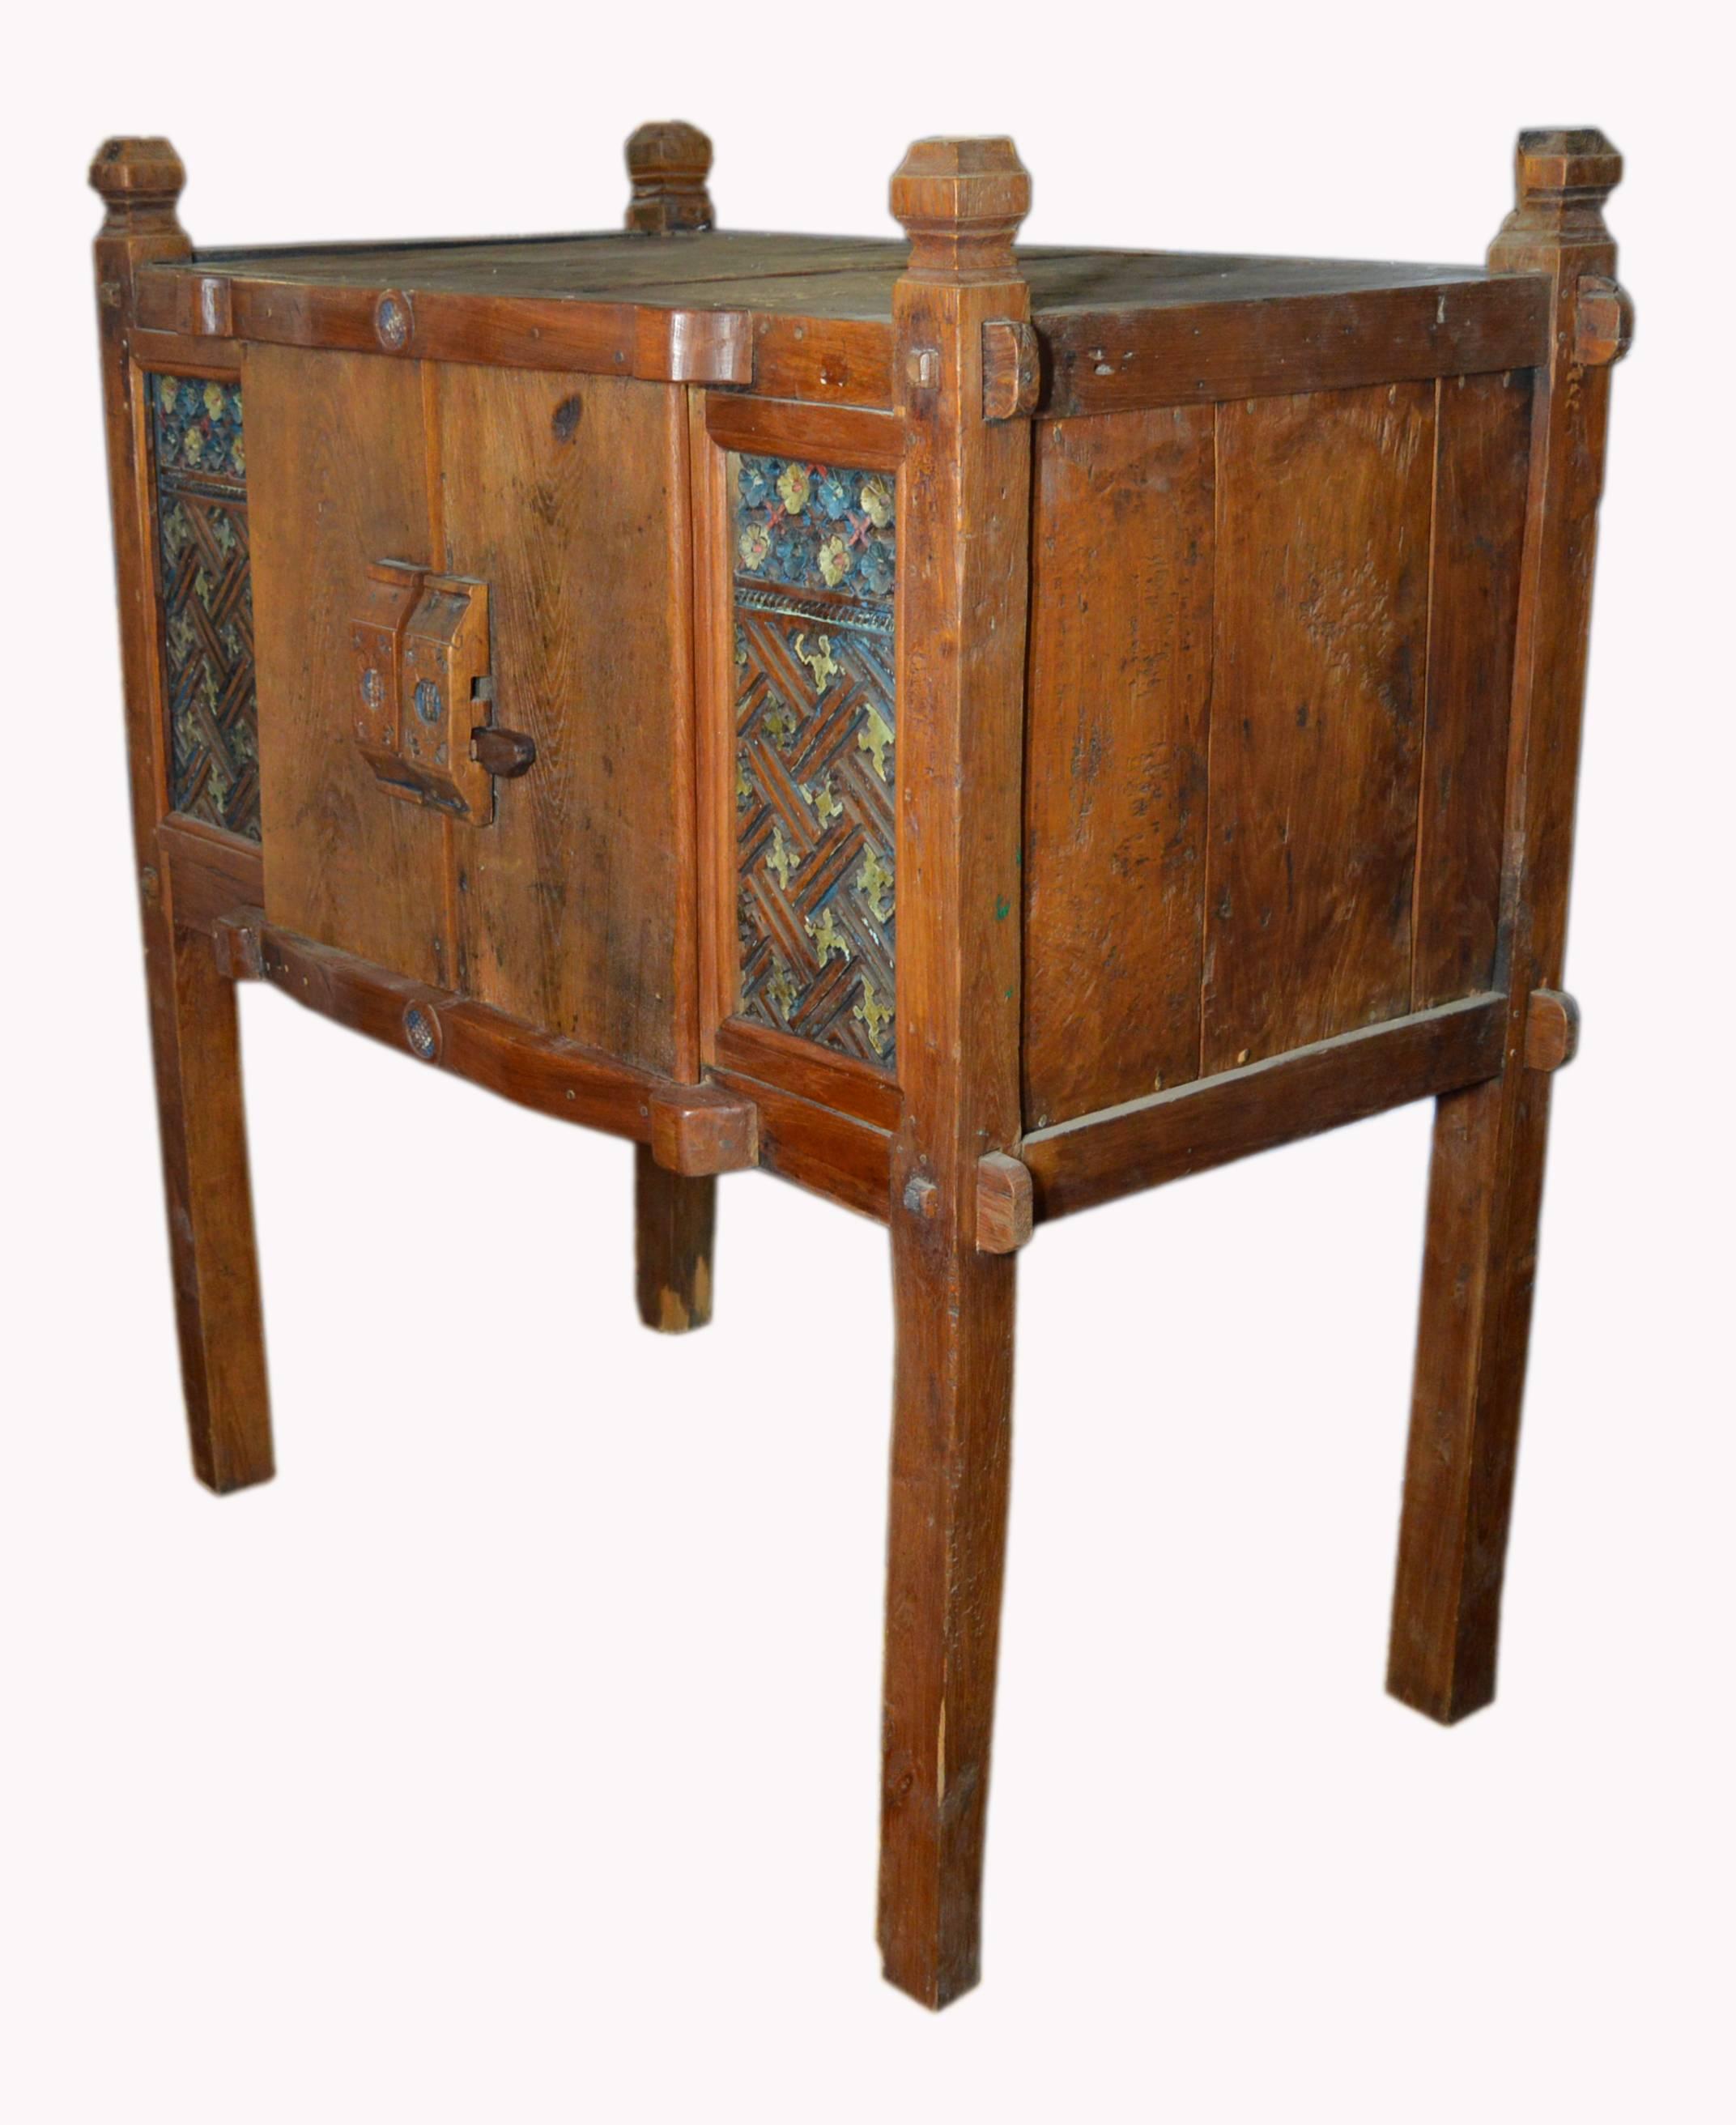 Hand-Carved Indonesian Antique Wooden Dresser with Doors and Hand-Painted Carved Ornament